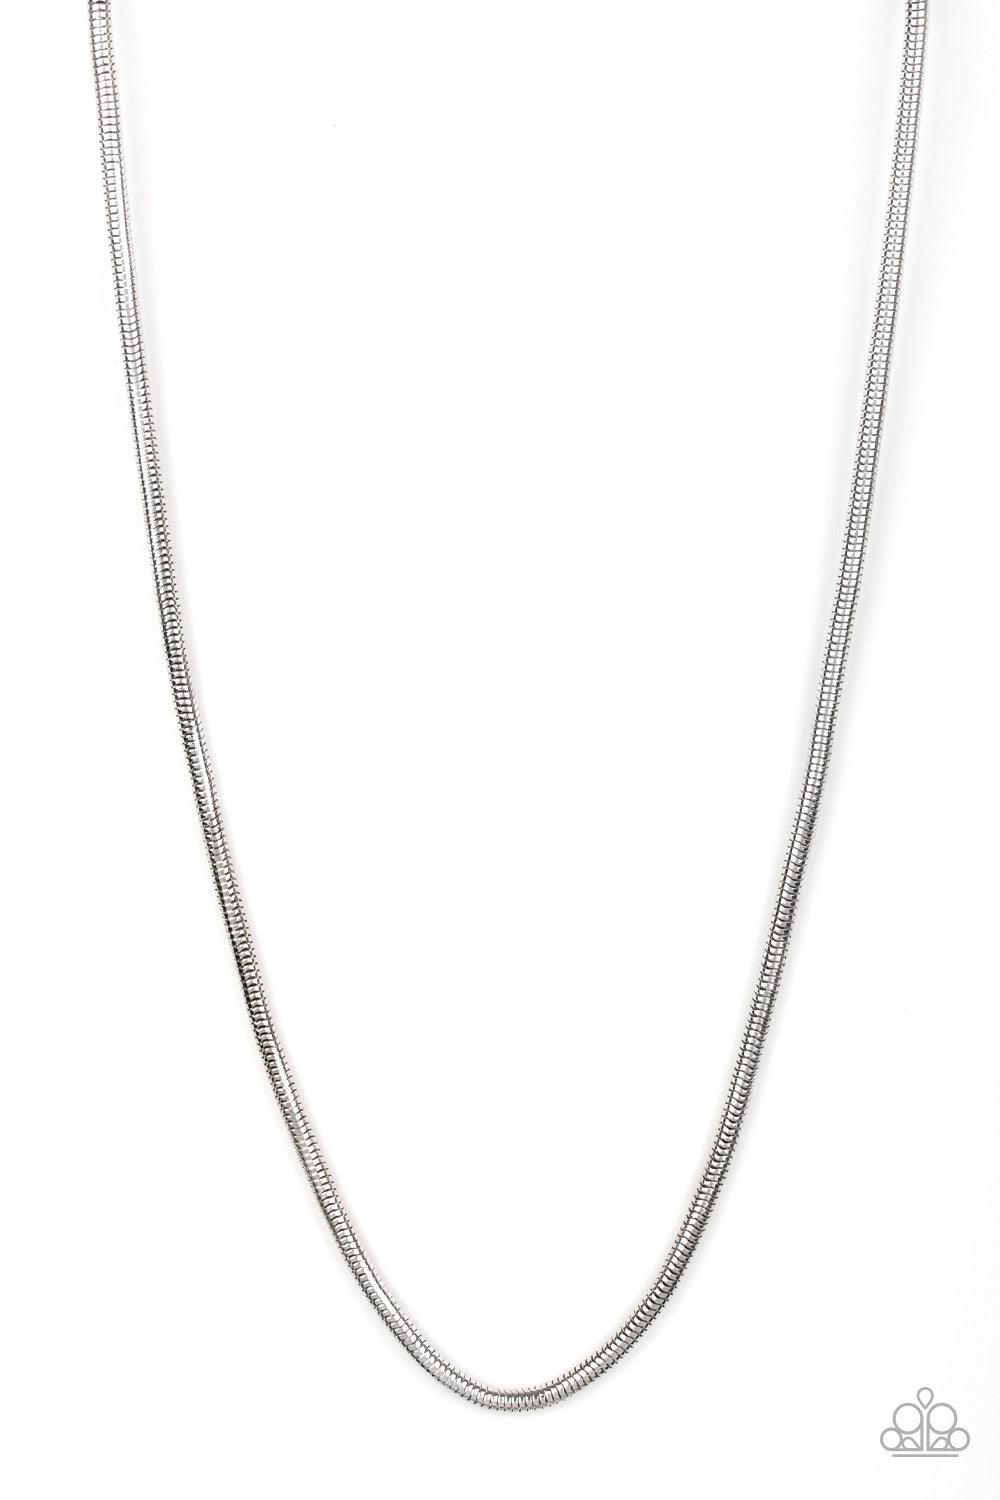 Paparazzi Accessories Victory Lap - Silver Brushed in a high-sheen shimmer, a rounded silver snake chain drapes across the chest for a sleek look. Features an adjustable clasp closure. Jewelry